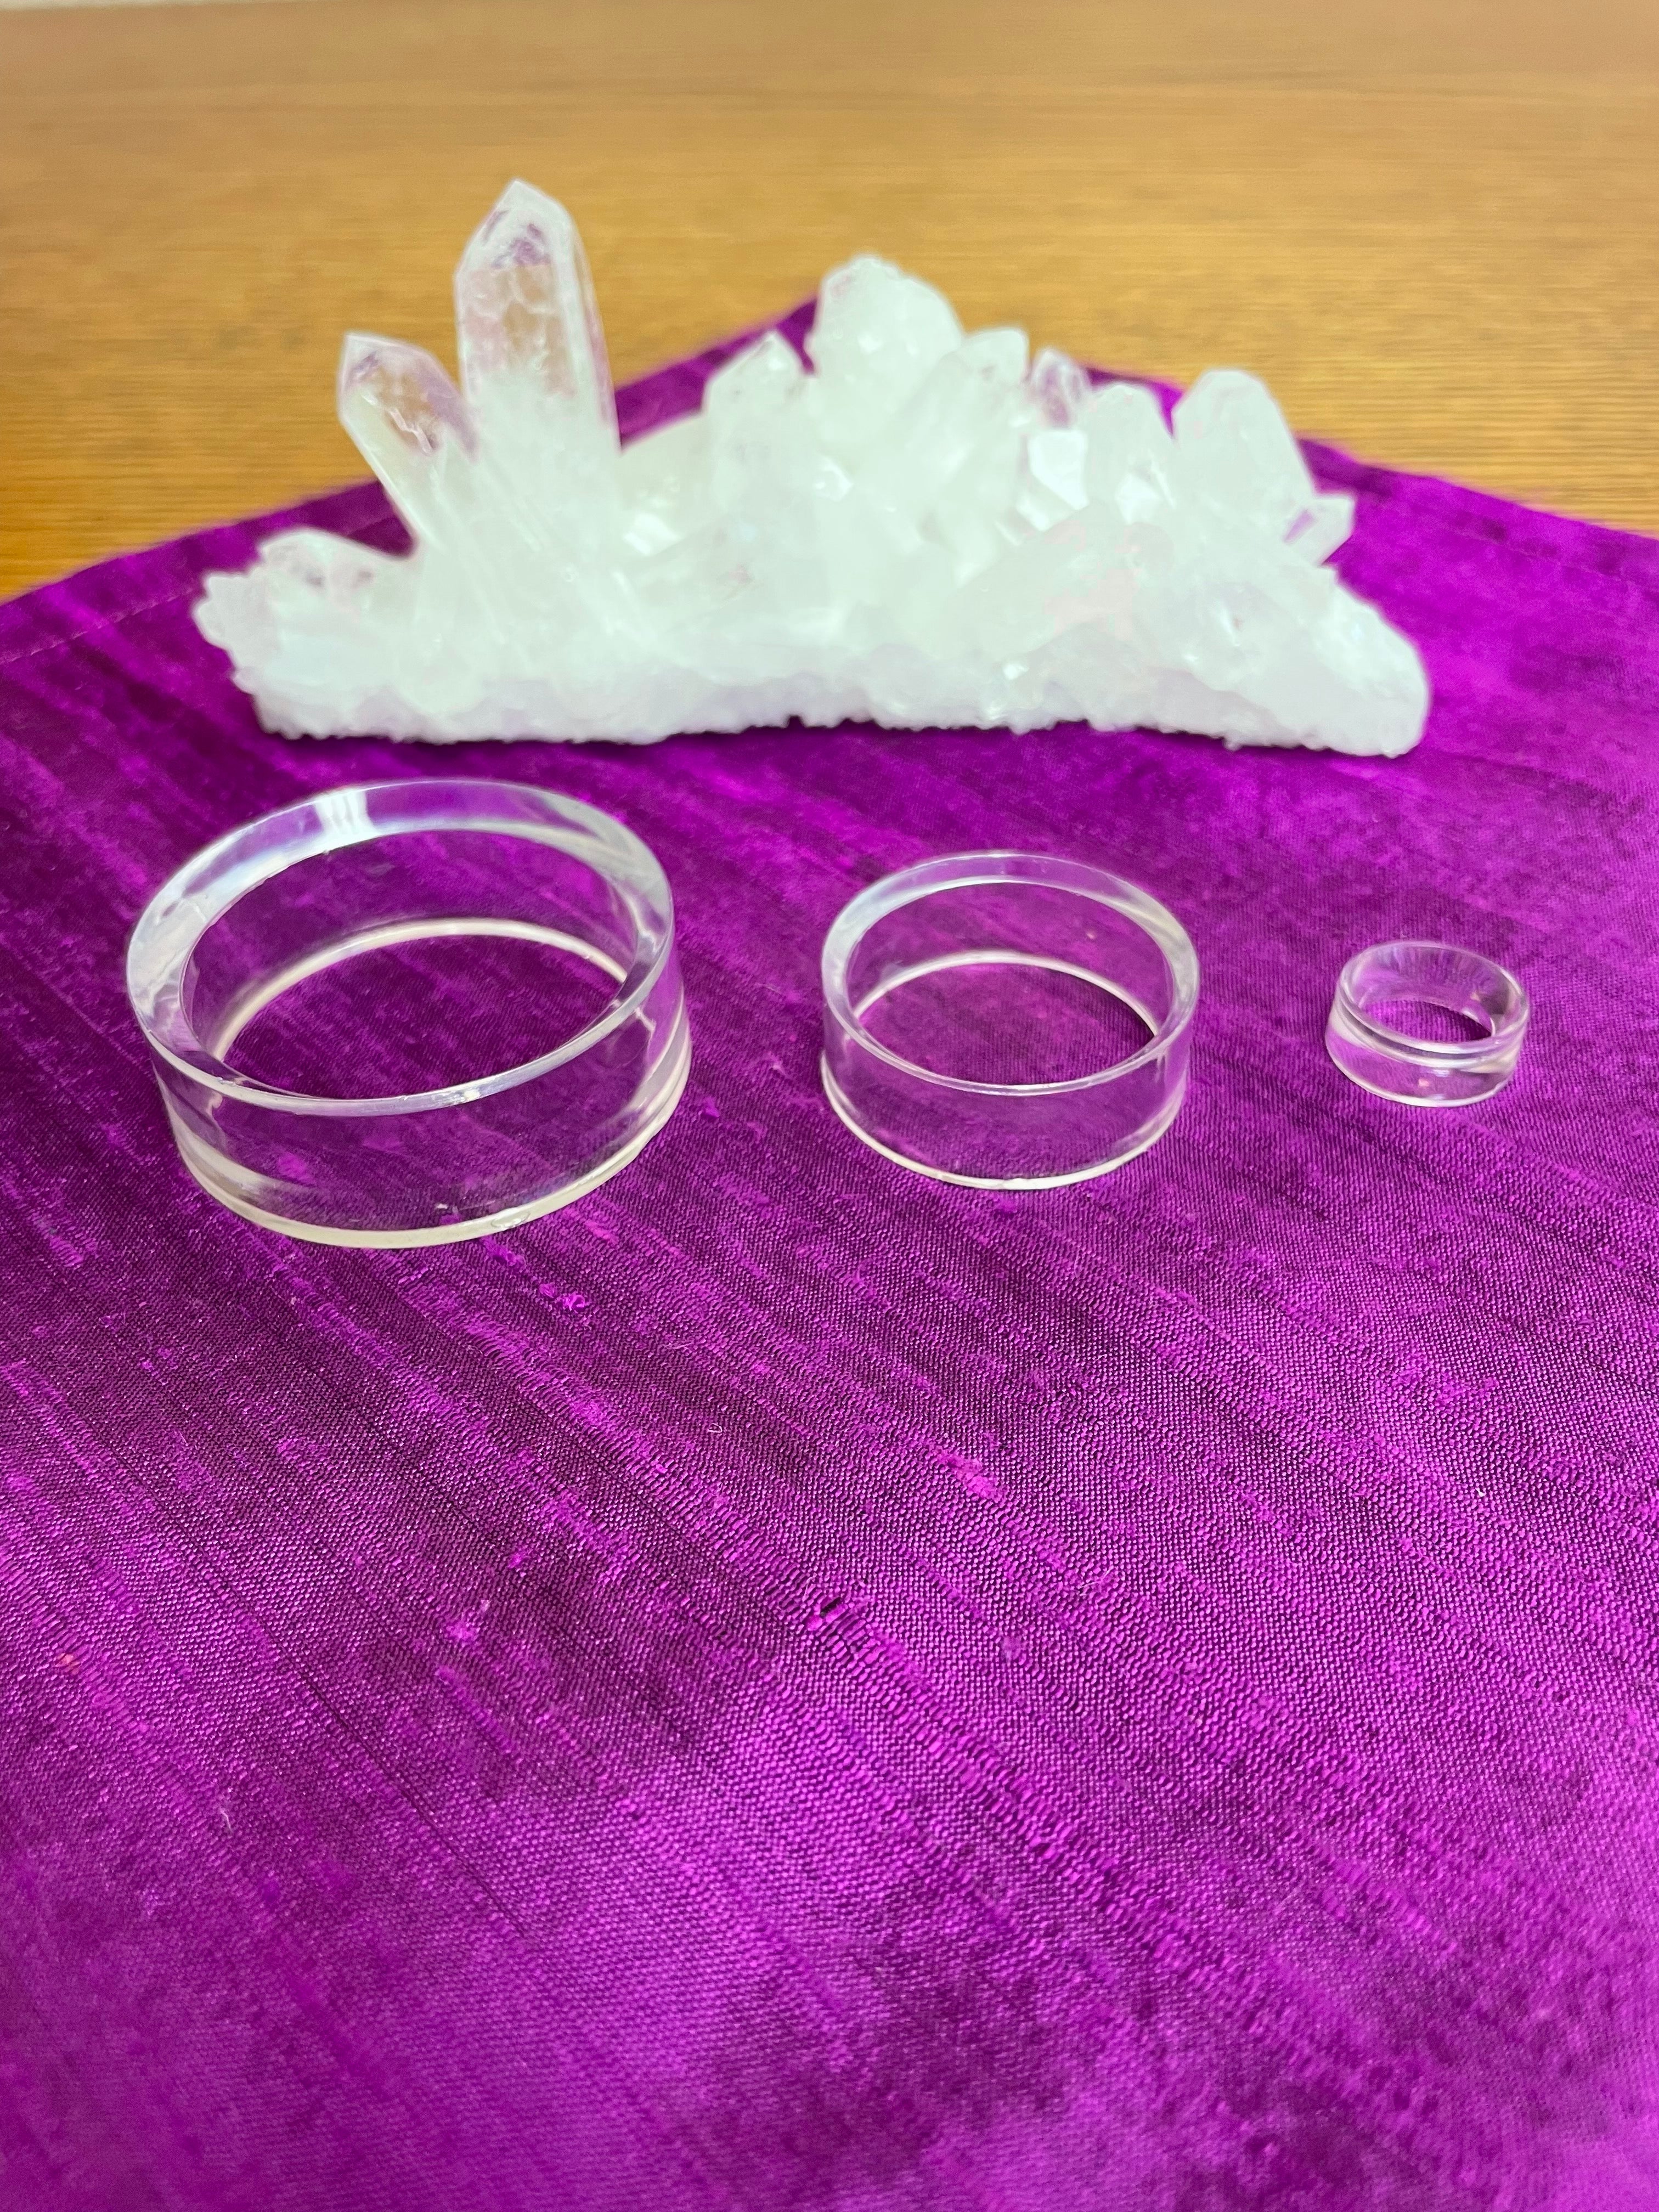 All 3 sizes.  Your basic clear plastic ring to display crystal spheres or eggs. Use to keep your crystal spheres and eggs in place, rather than rolling off your altar, table or nightstand - lol. This is the largest size I have at approximately 1.8"x 06" (d/h). The 3rd photo shows all three sizes I offer. Check out my crystal spheres and my ruby-in-matrix eggs and Judy Hall's The Crystal Bible Books - they are awesome! Cost is $1.00 for the large size (and must be purchased as an add-on item).